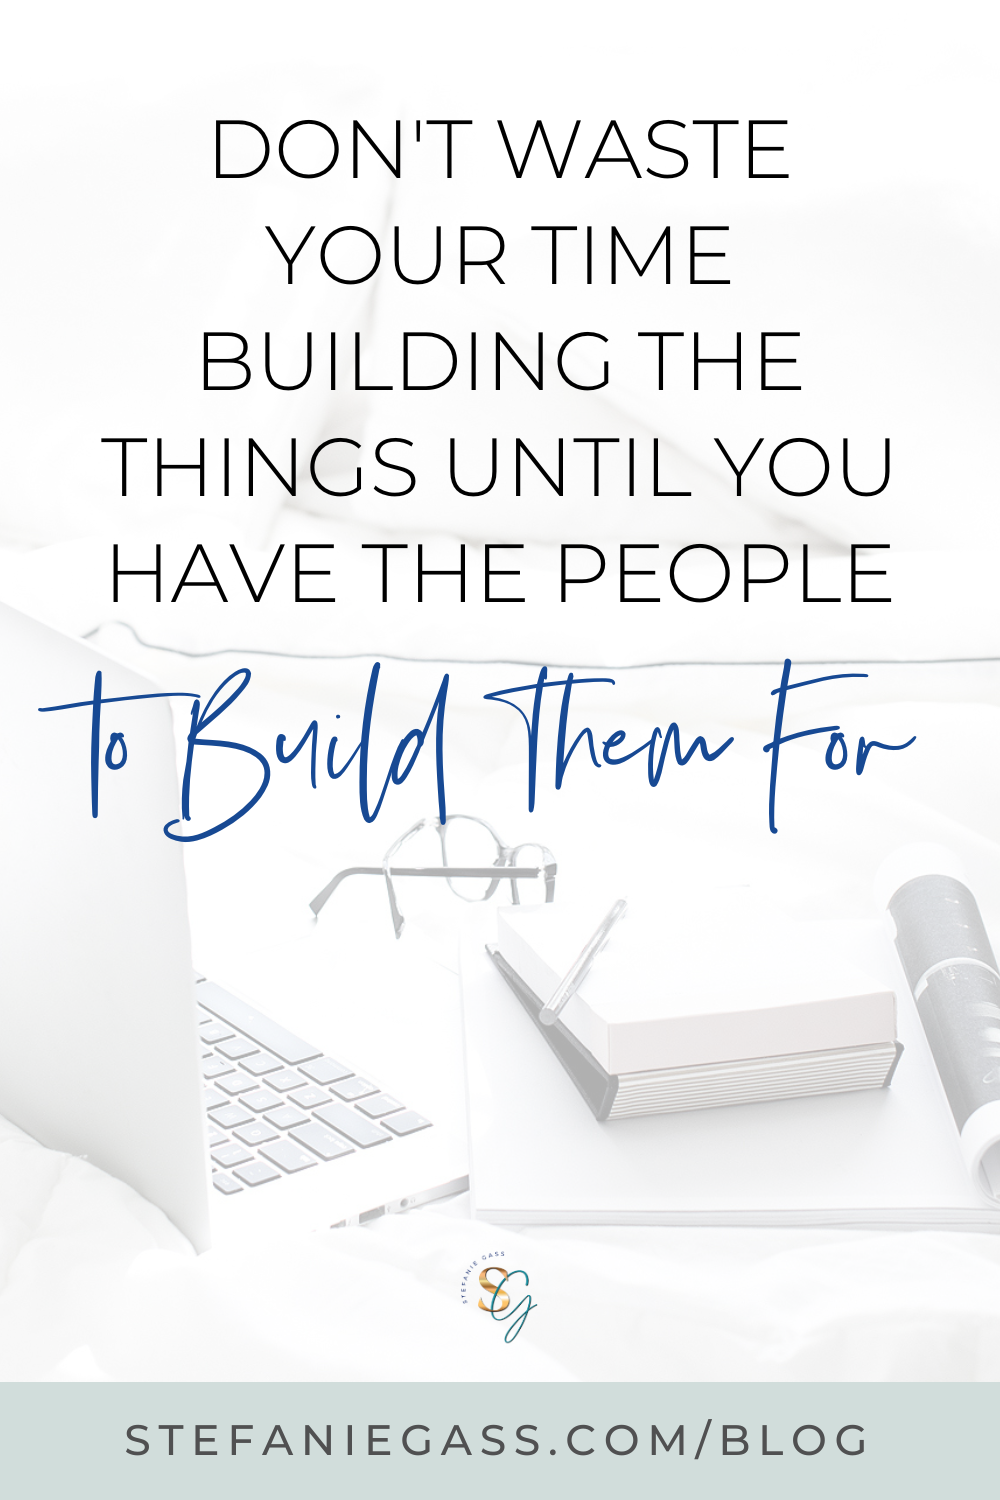 Text states " Don't waste your time building the things until you have the people to build them for". Behind the text is a desk with a laptop, glasses, and books. 